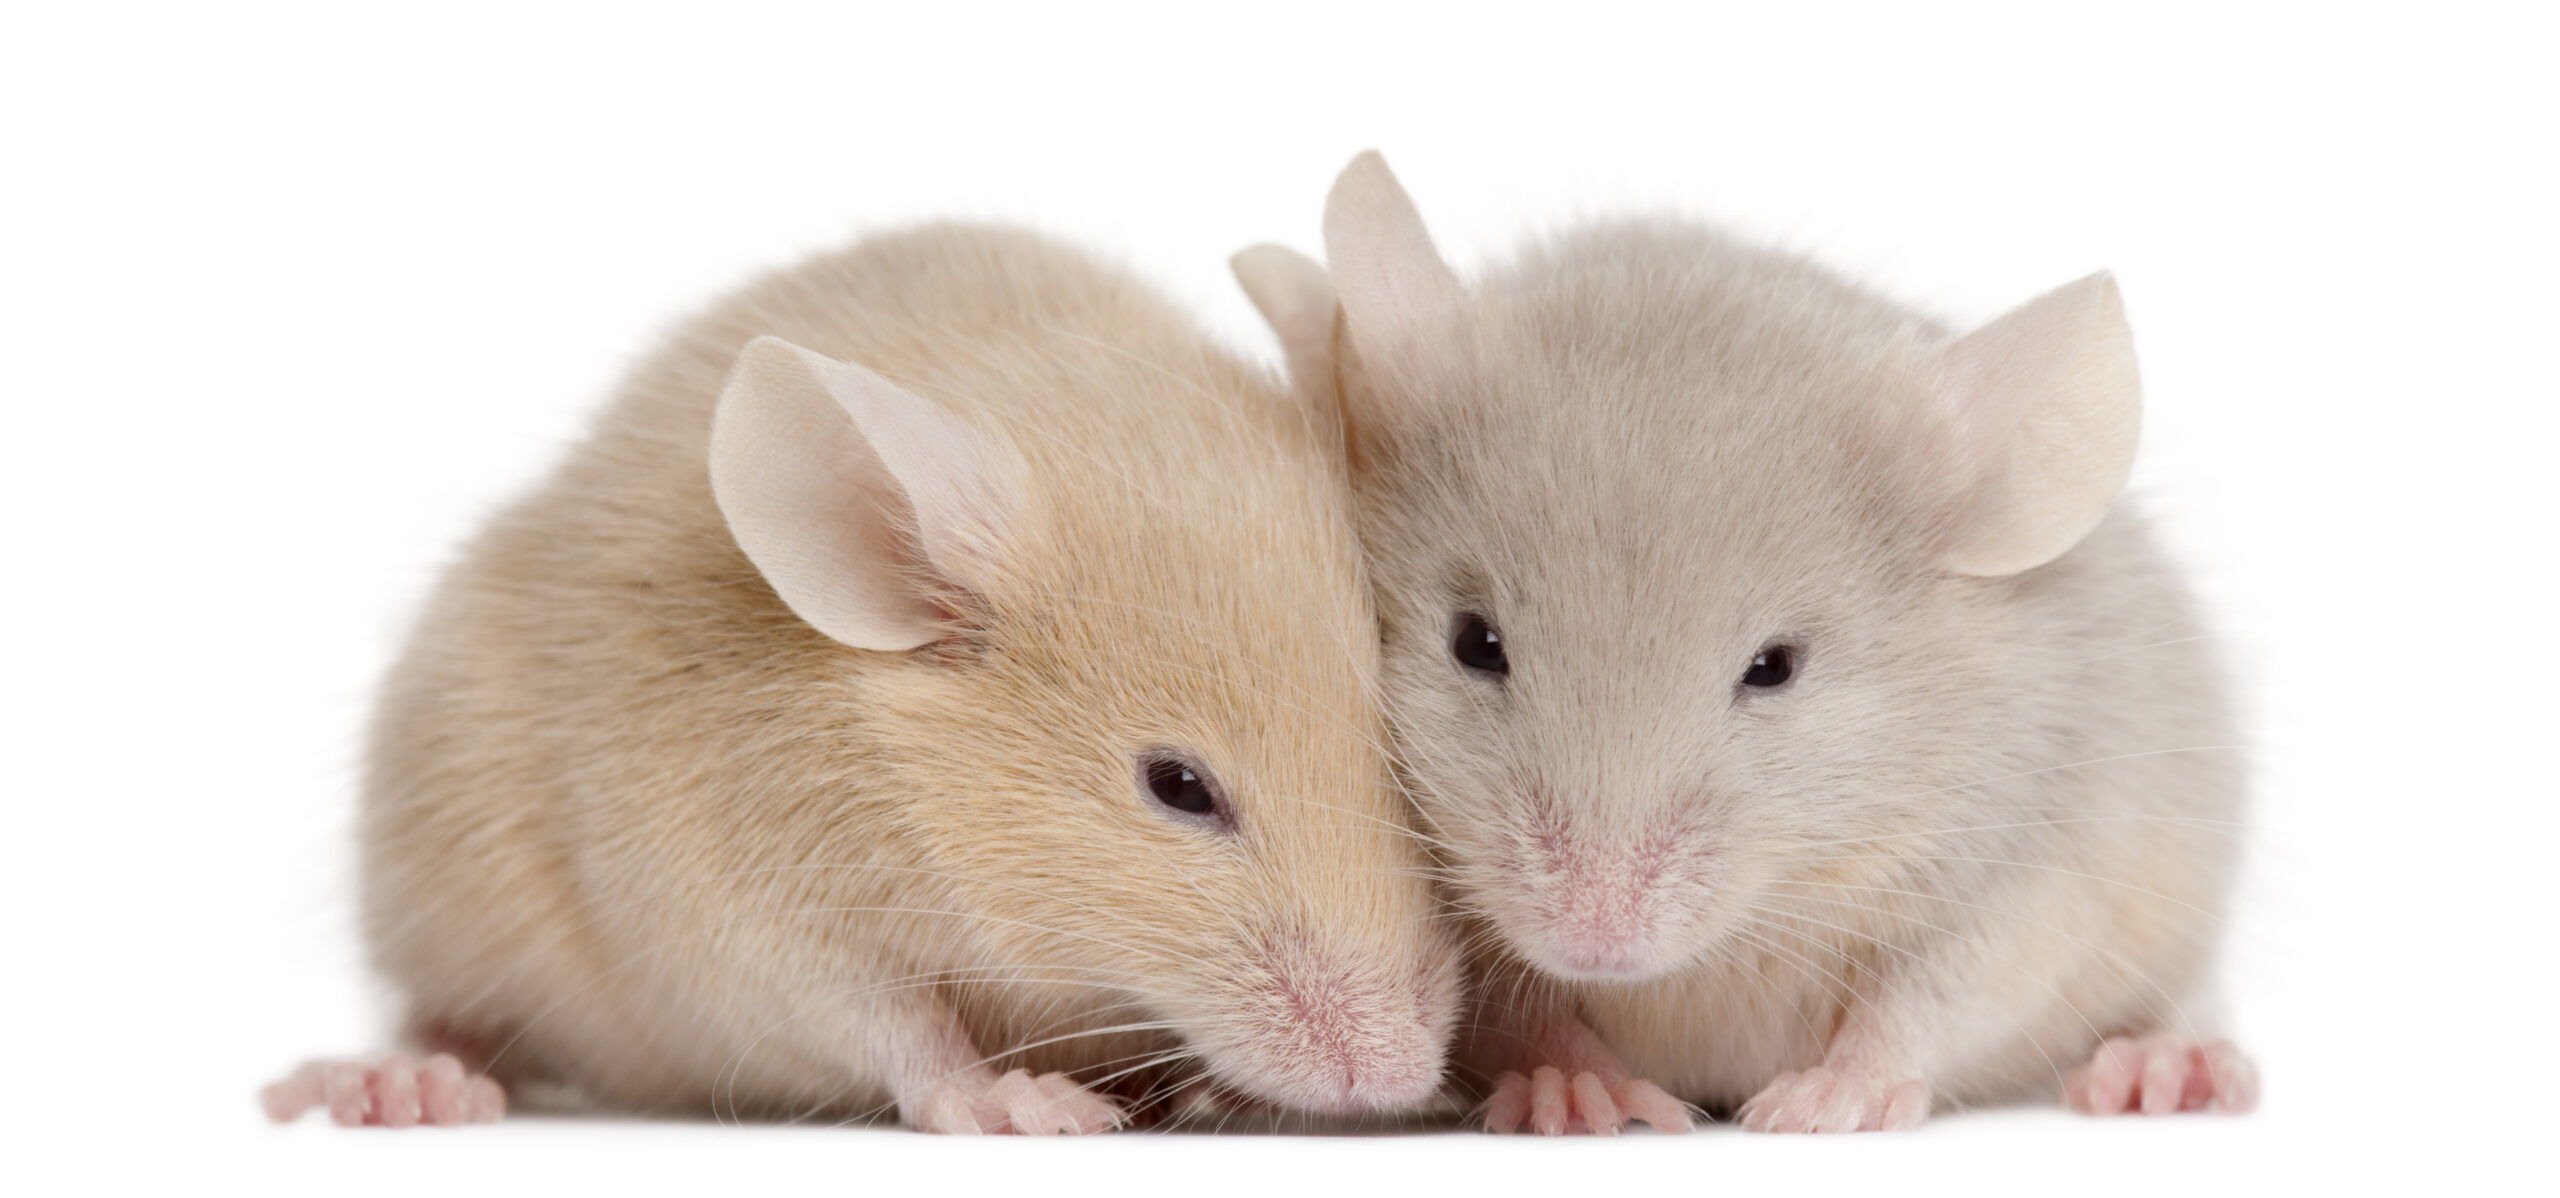 Scientists create baby mice from two mouse dads